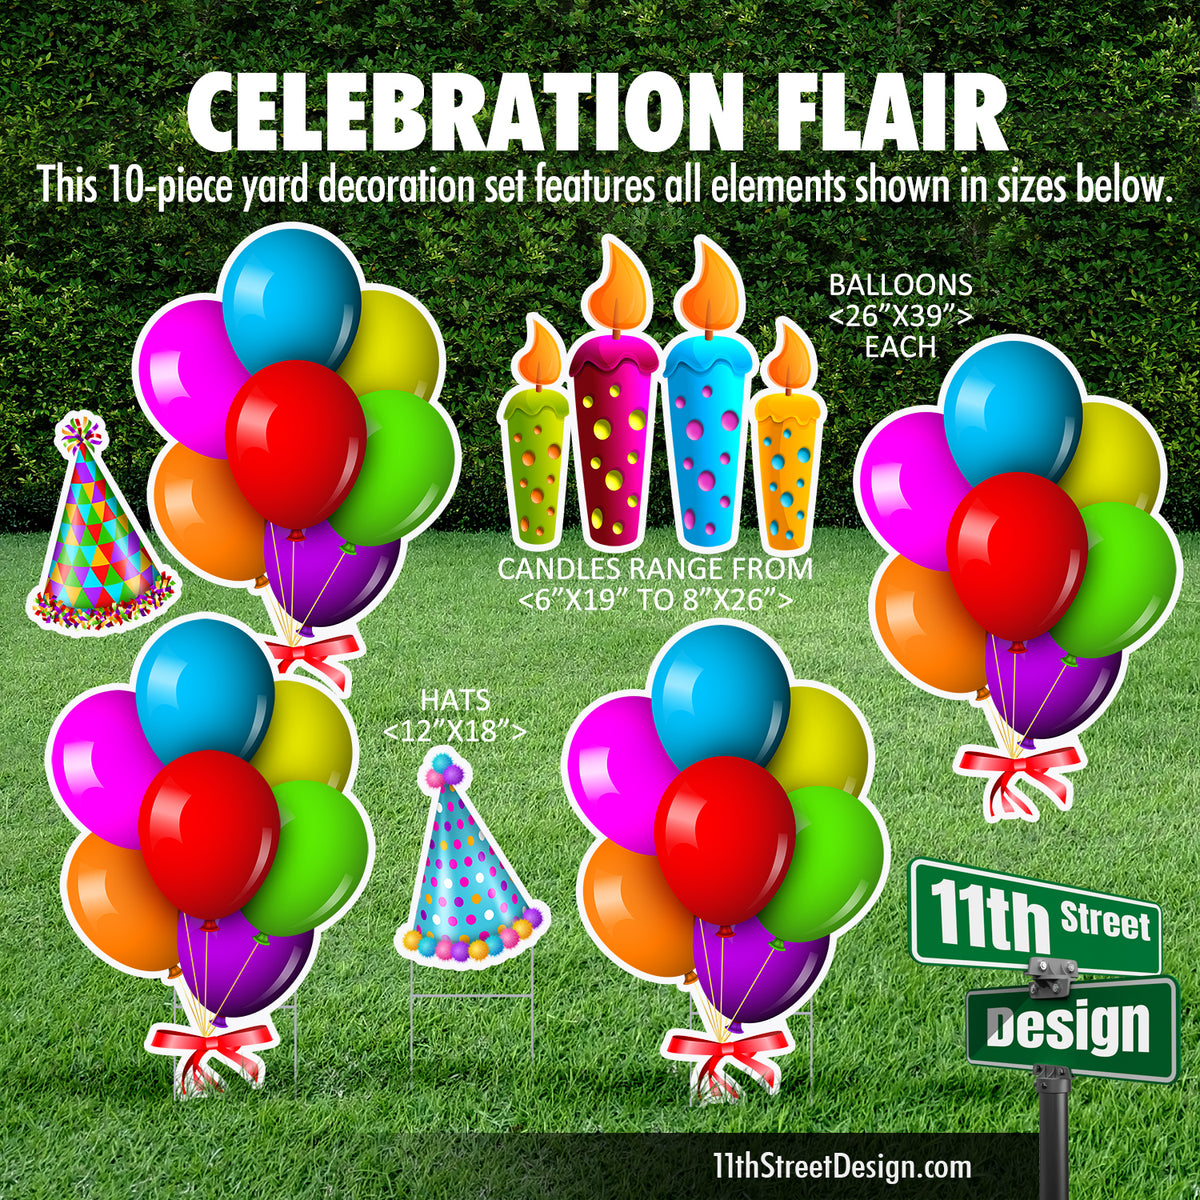 Celebration Flair - Balloon Bunches, Spotted Candles &amp; Party Hats